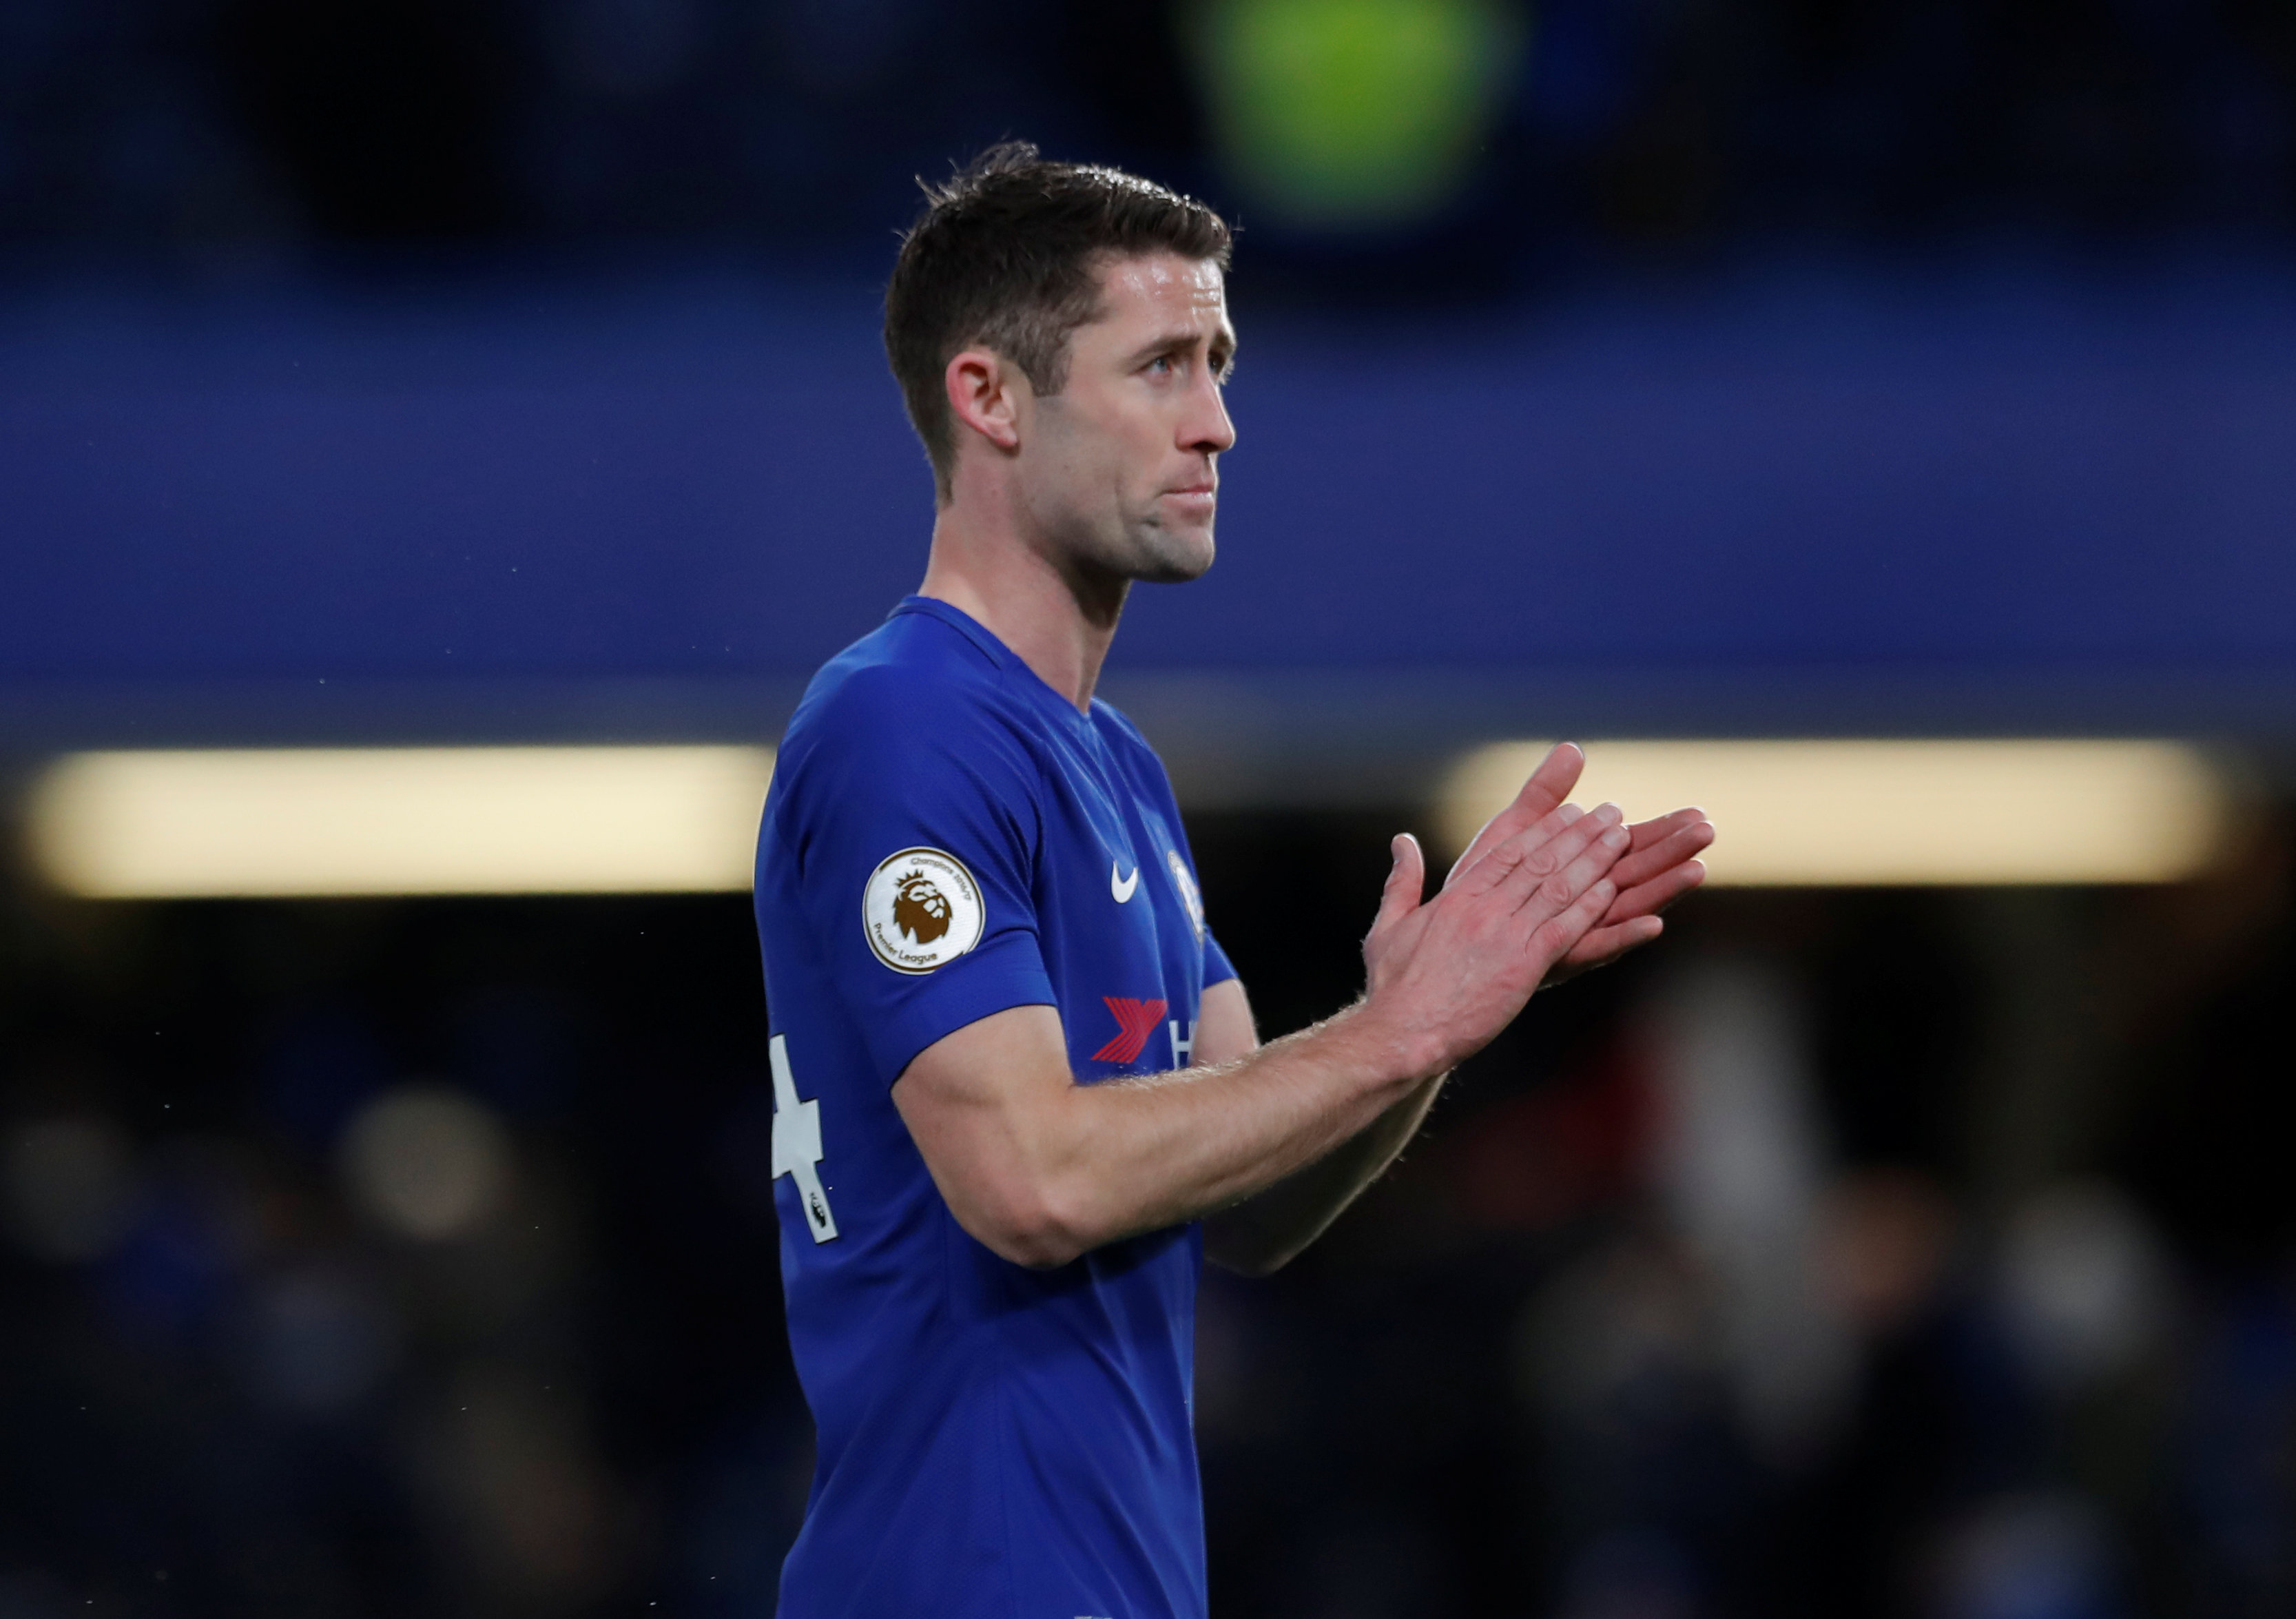 Football: Chelsea's Cahill 'devastated' by Mason's retirement